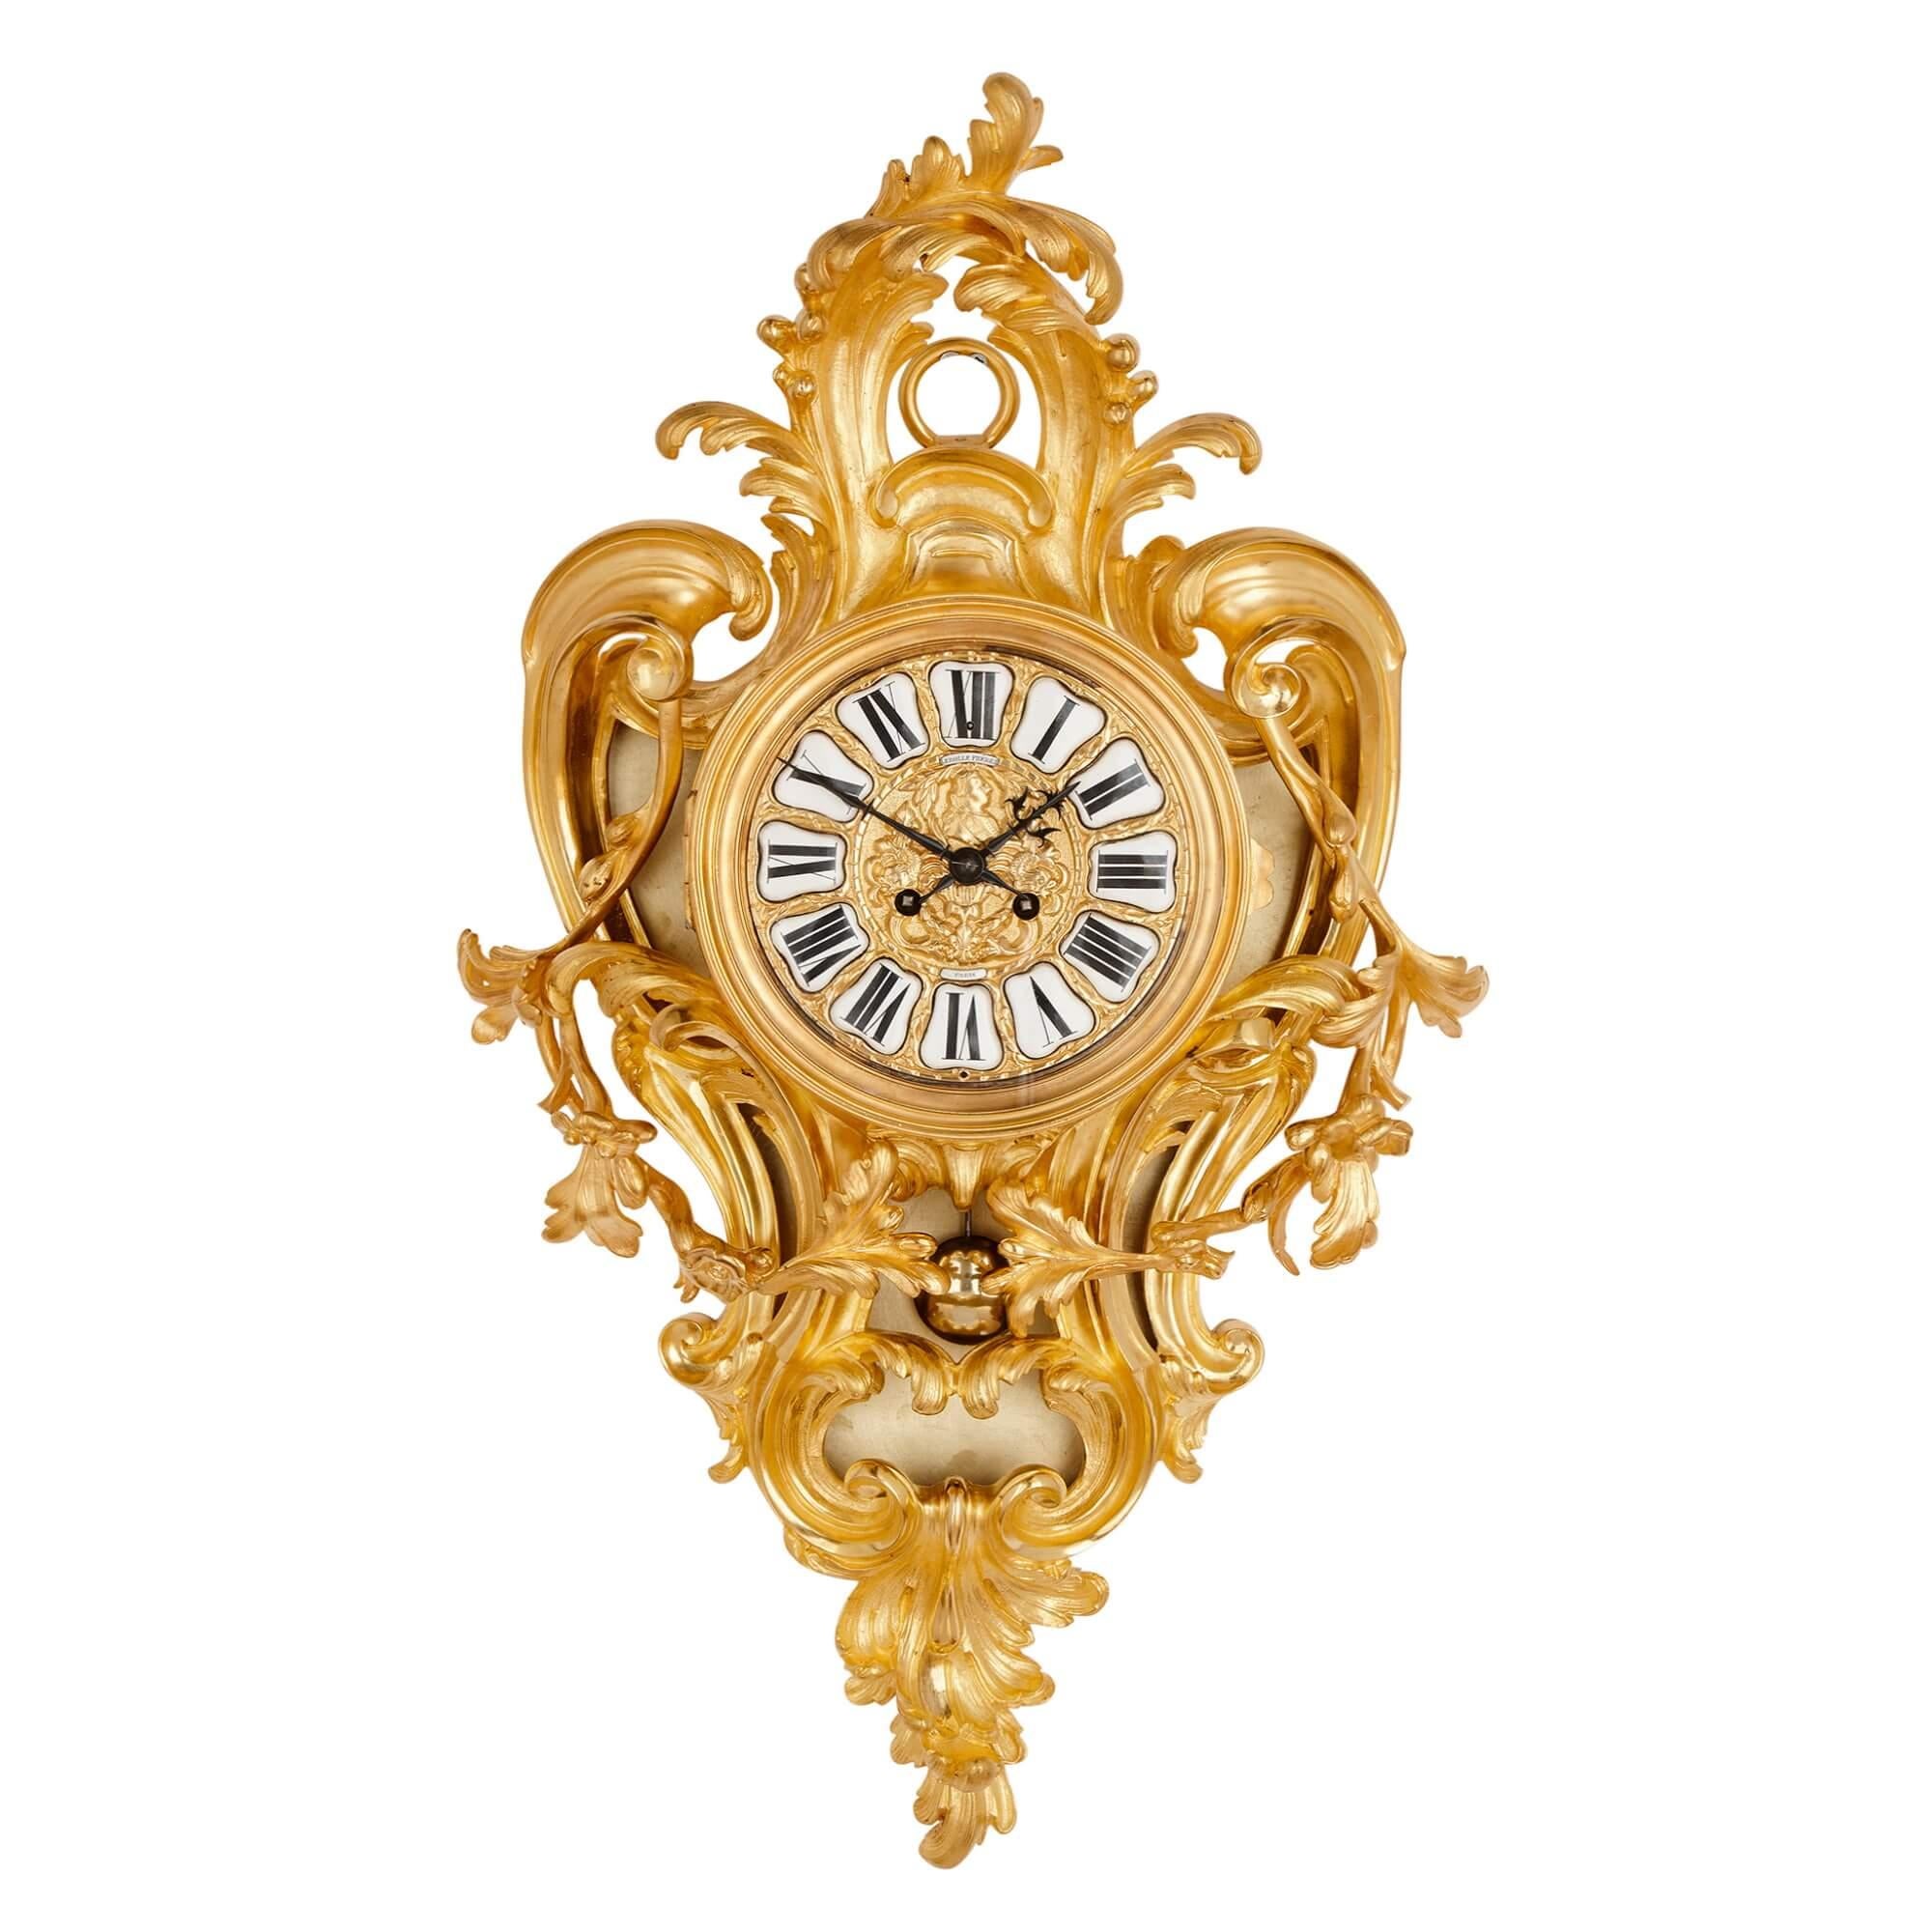 Gilt-bronze cartel clock and Barometer set by Lerolle Frères
French, c. 1860
Measures: Barometer: height 71cm, width 43cm, depth 15cm
Clock: height 71cm, width 40cm, depth 15cm

Each with floral decoration and enamel cartouches that are signed,